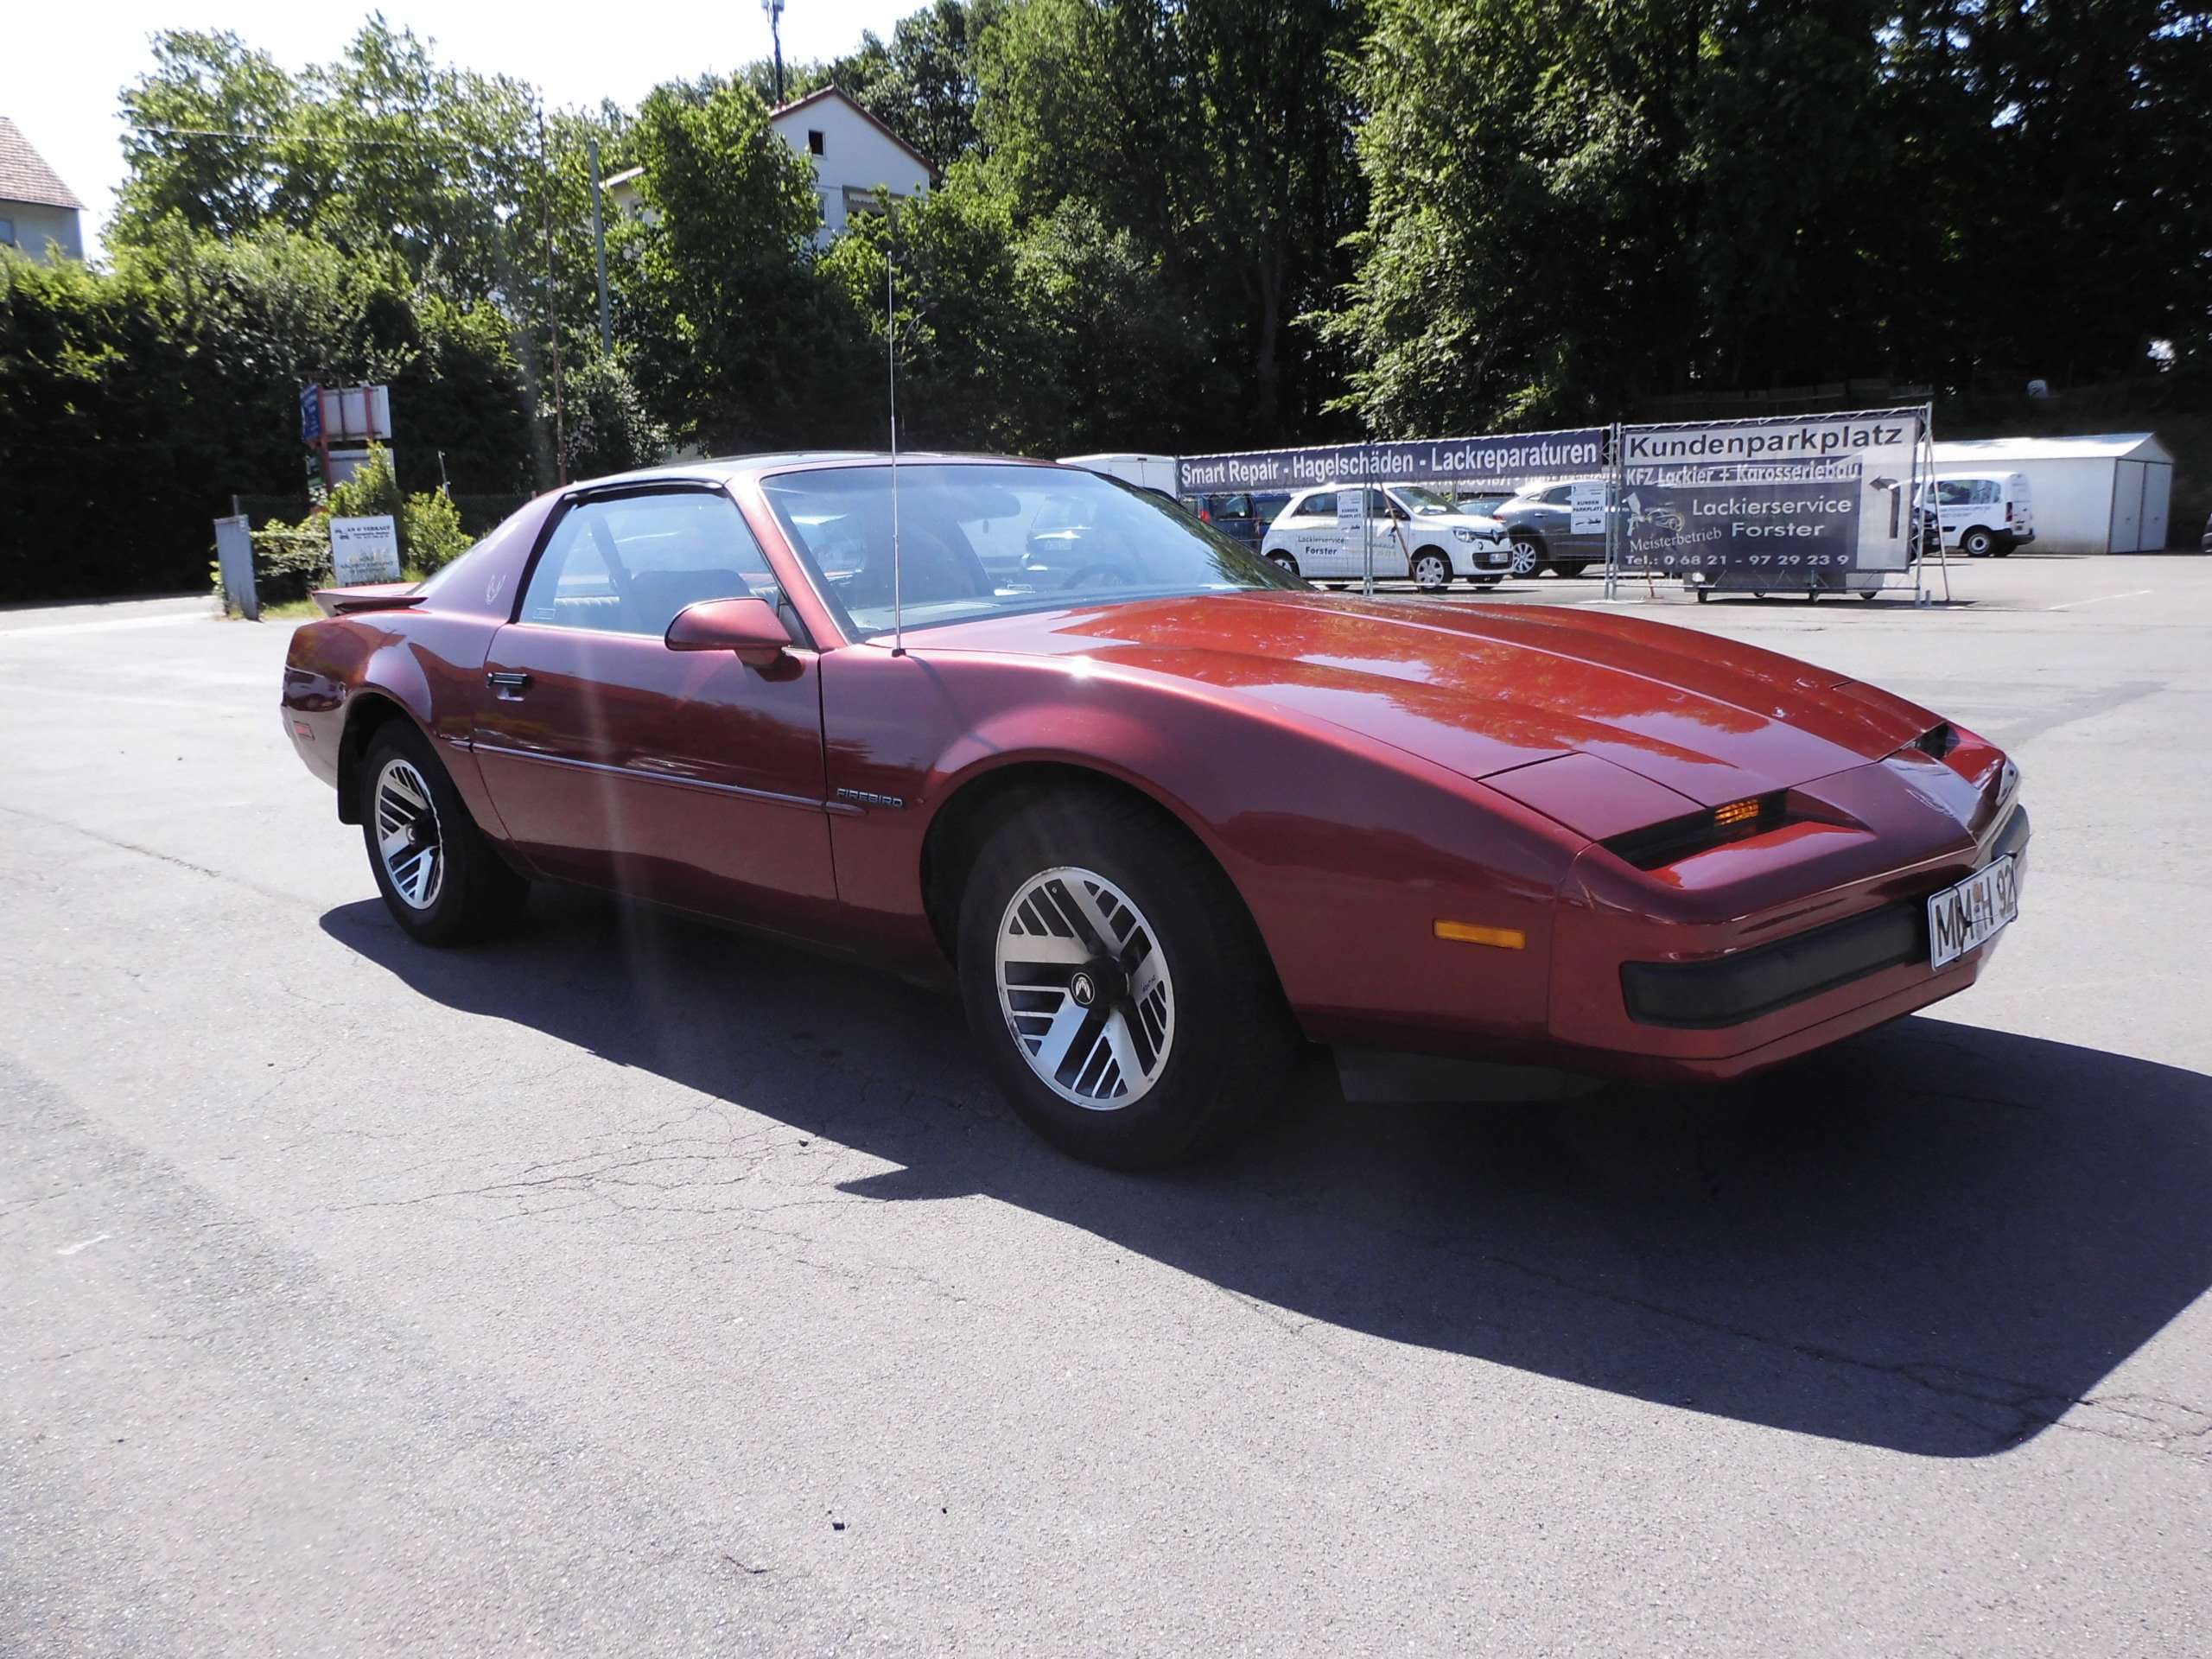 Pontiac Firebird Coupe in Red used in Furpach for € 7,200.-